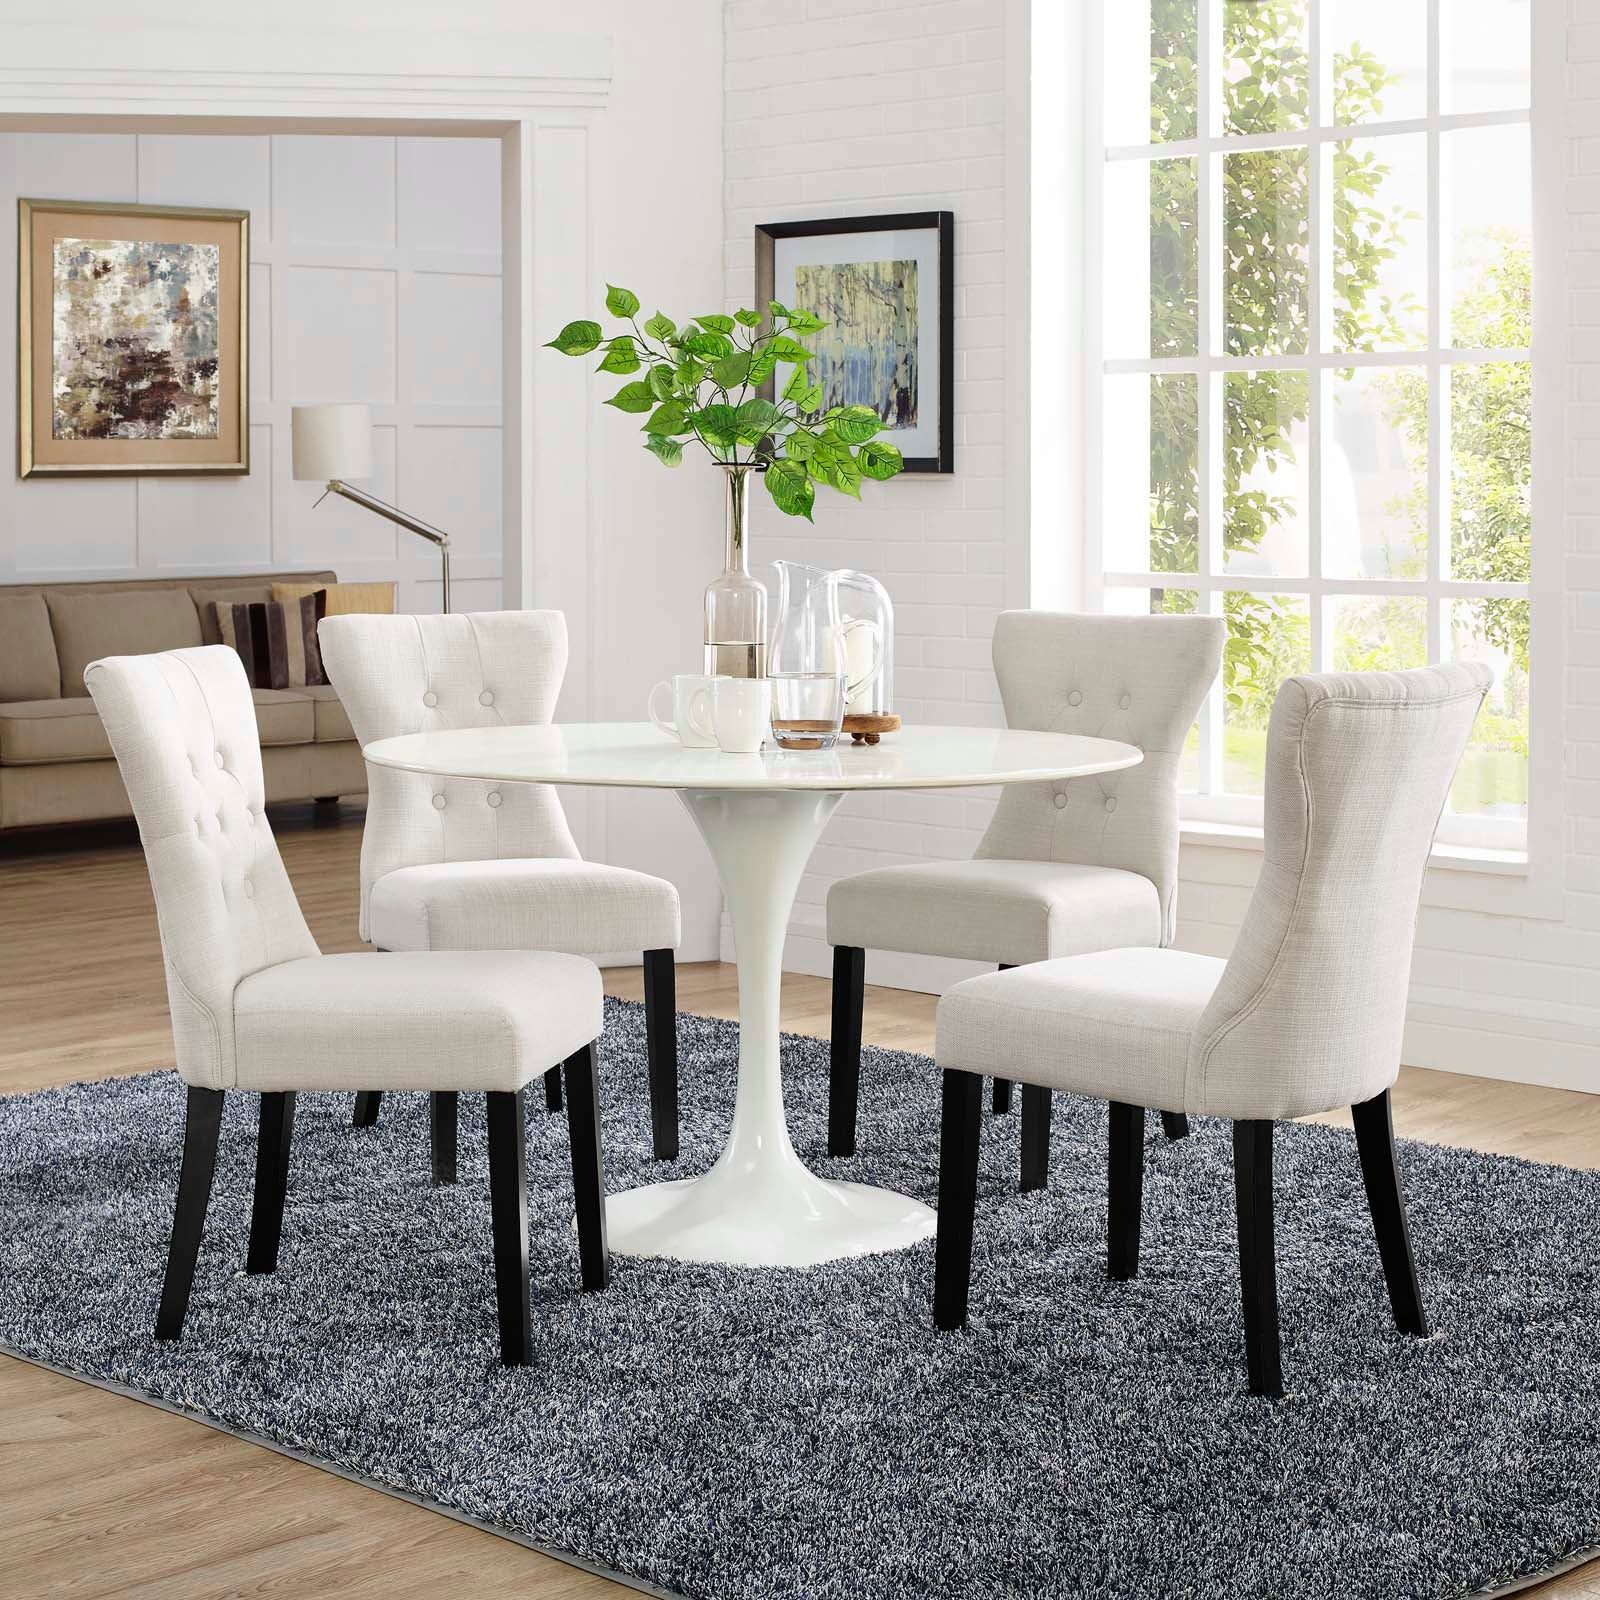 Modway Dining Chairs - Silhouette Dining Side Chairs Upholstered Fabric Beige ( Set of 4 )